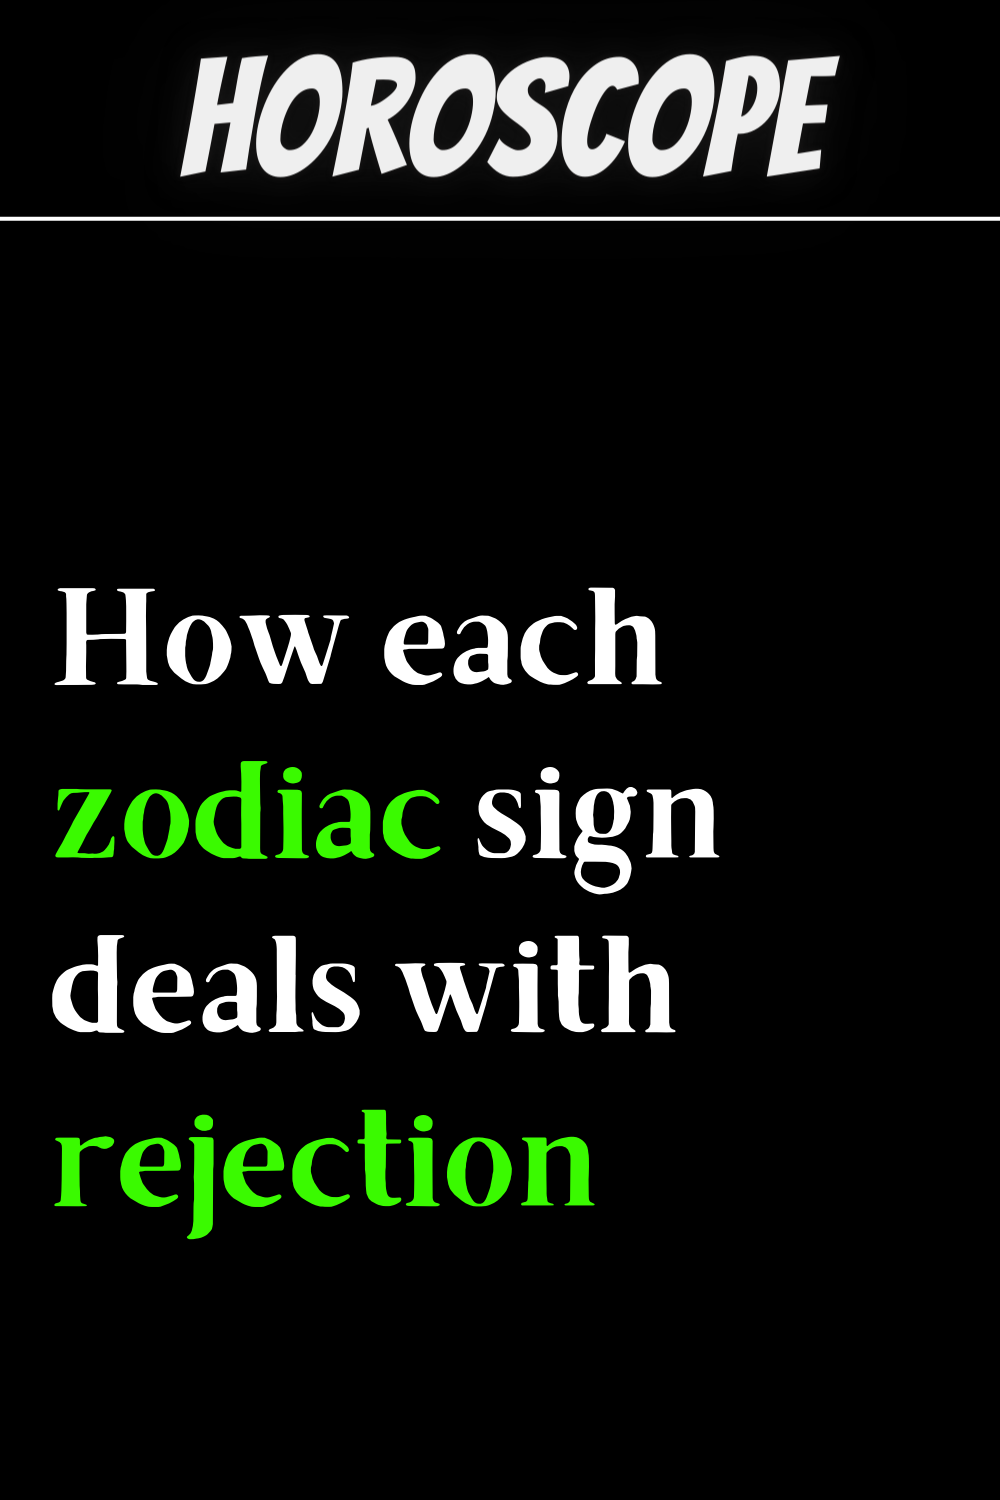 How each zodiac sign deals with rejection